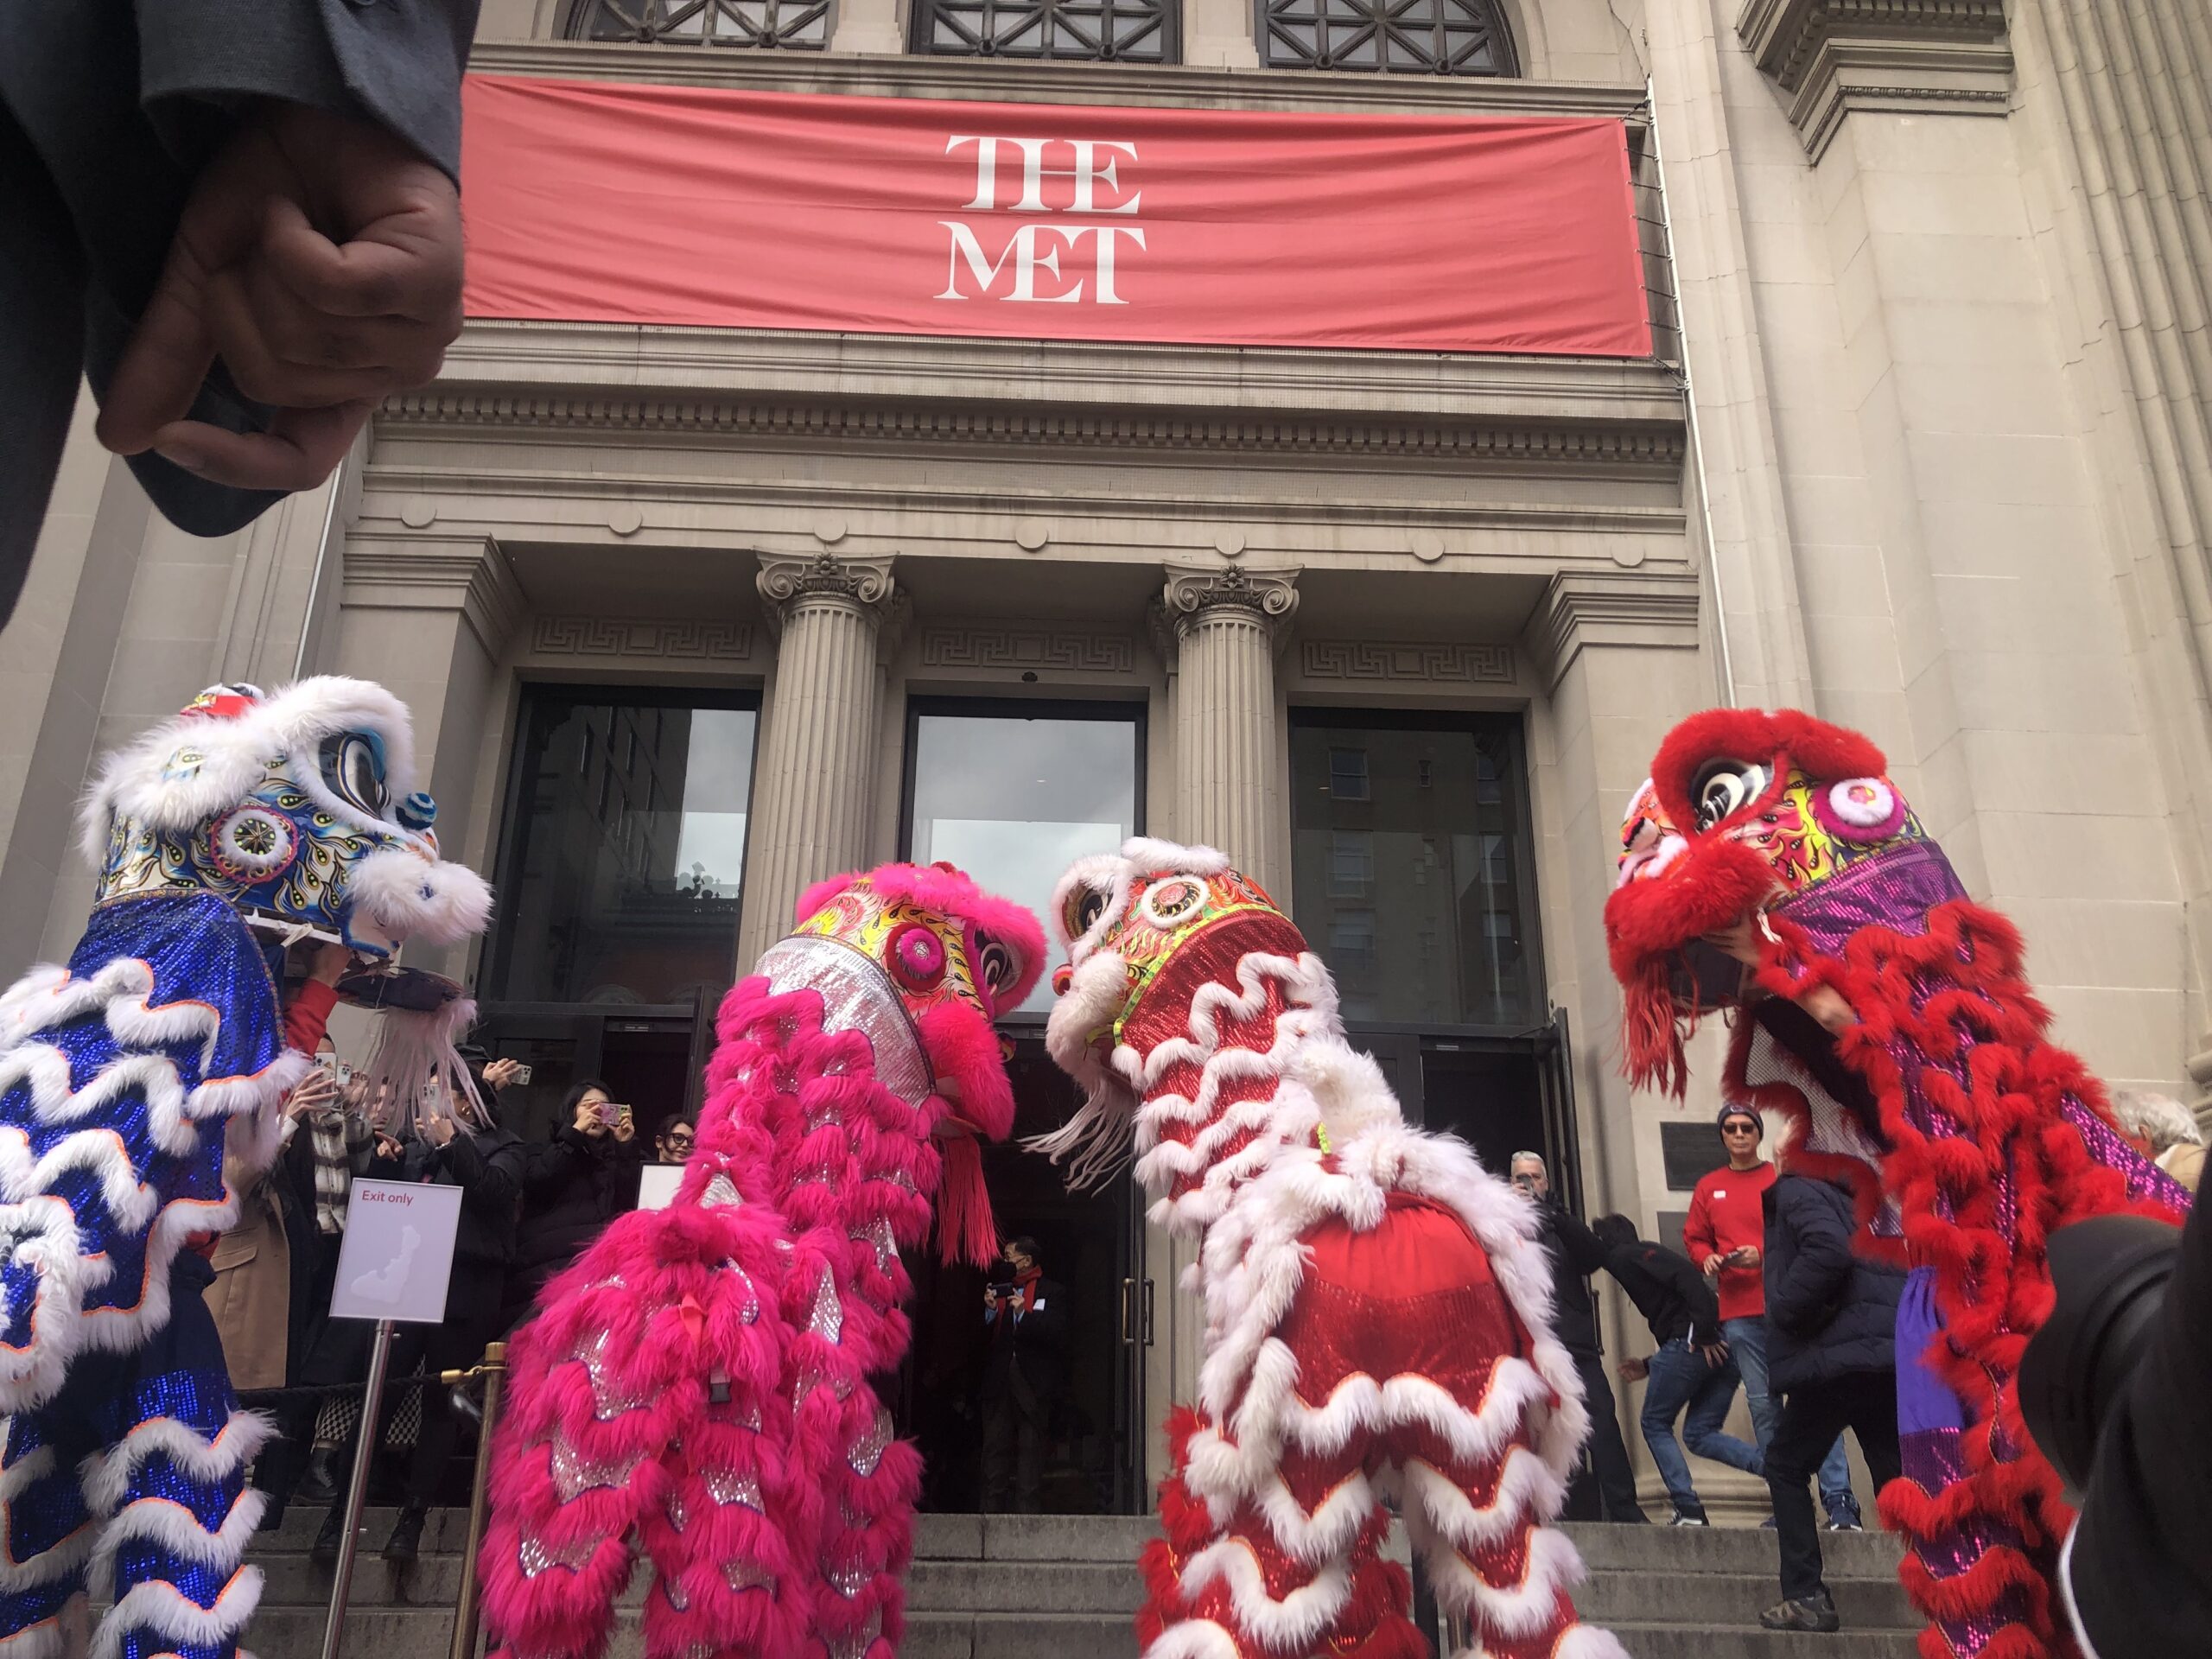 Until flying becomes more fuel efficient, consider a nearby “stay-cation.” Stumbling upon these Chinese dragons visiting The Met reminded me that New York is a world of countries  and cultures to explore. JENNY NOBLE